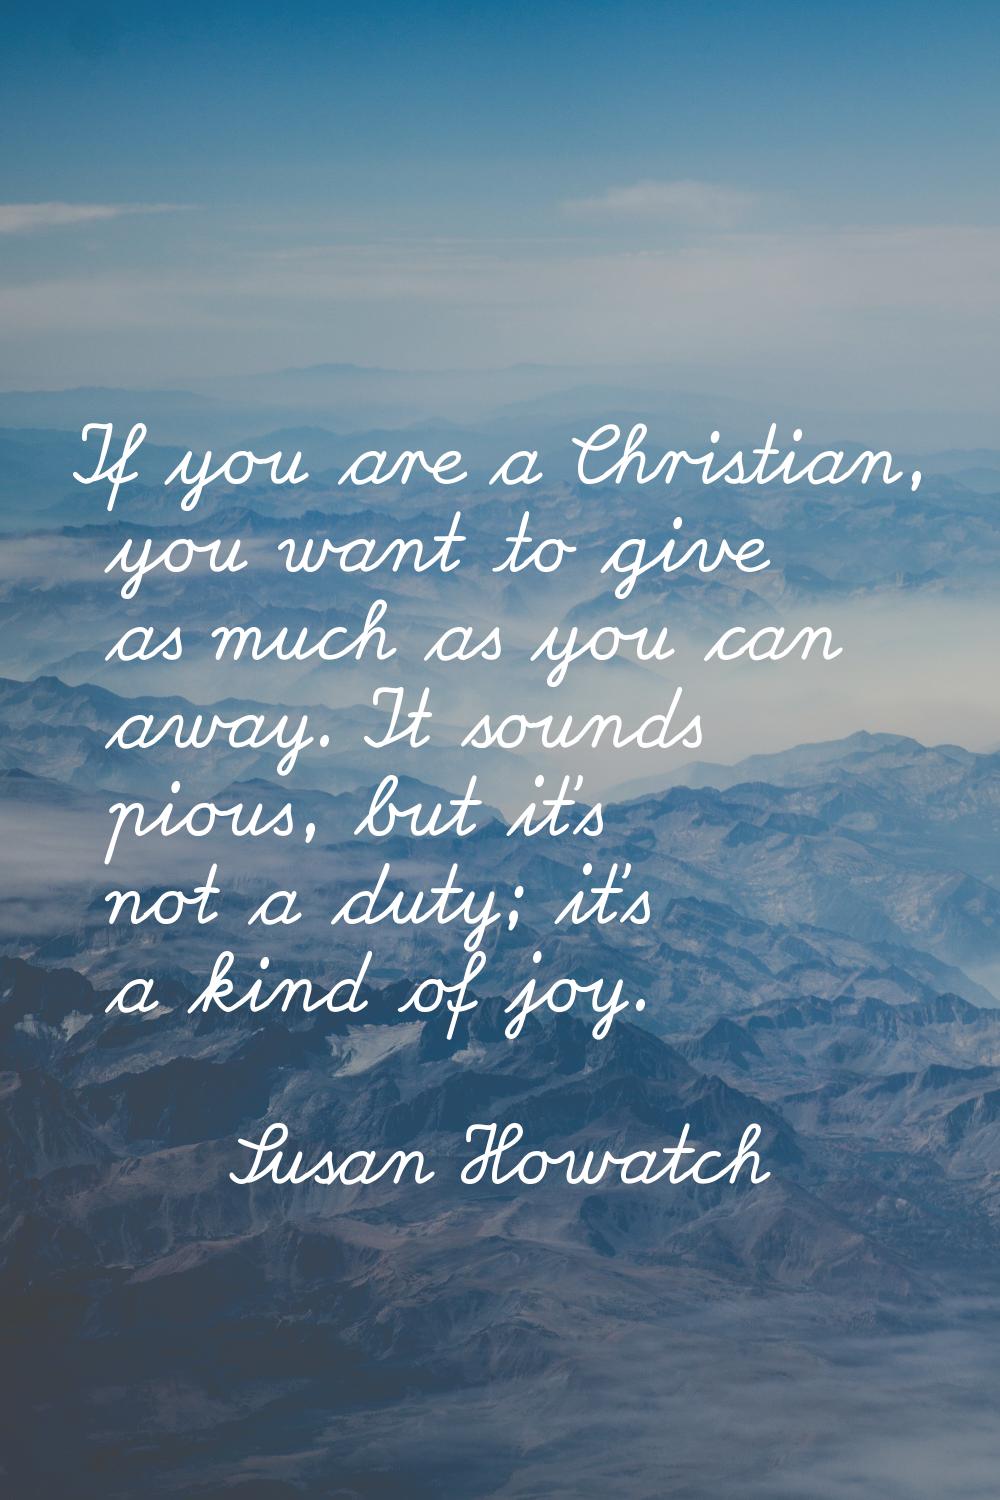 If you are a Christian, you want to give as much as you can away. It sounds pious, but it's not a d